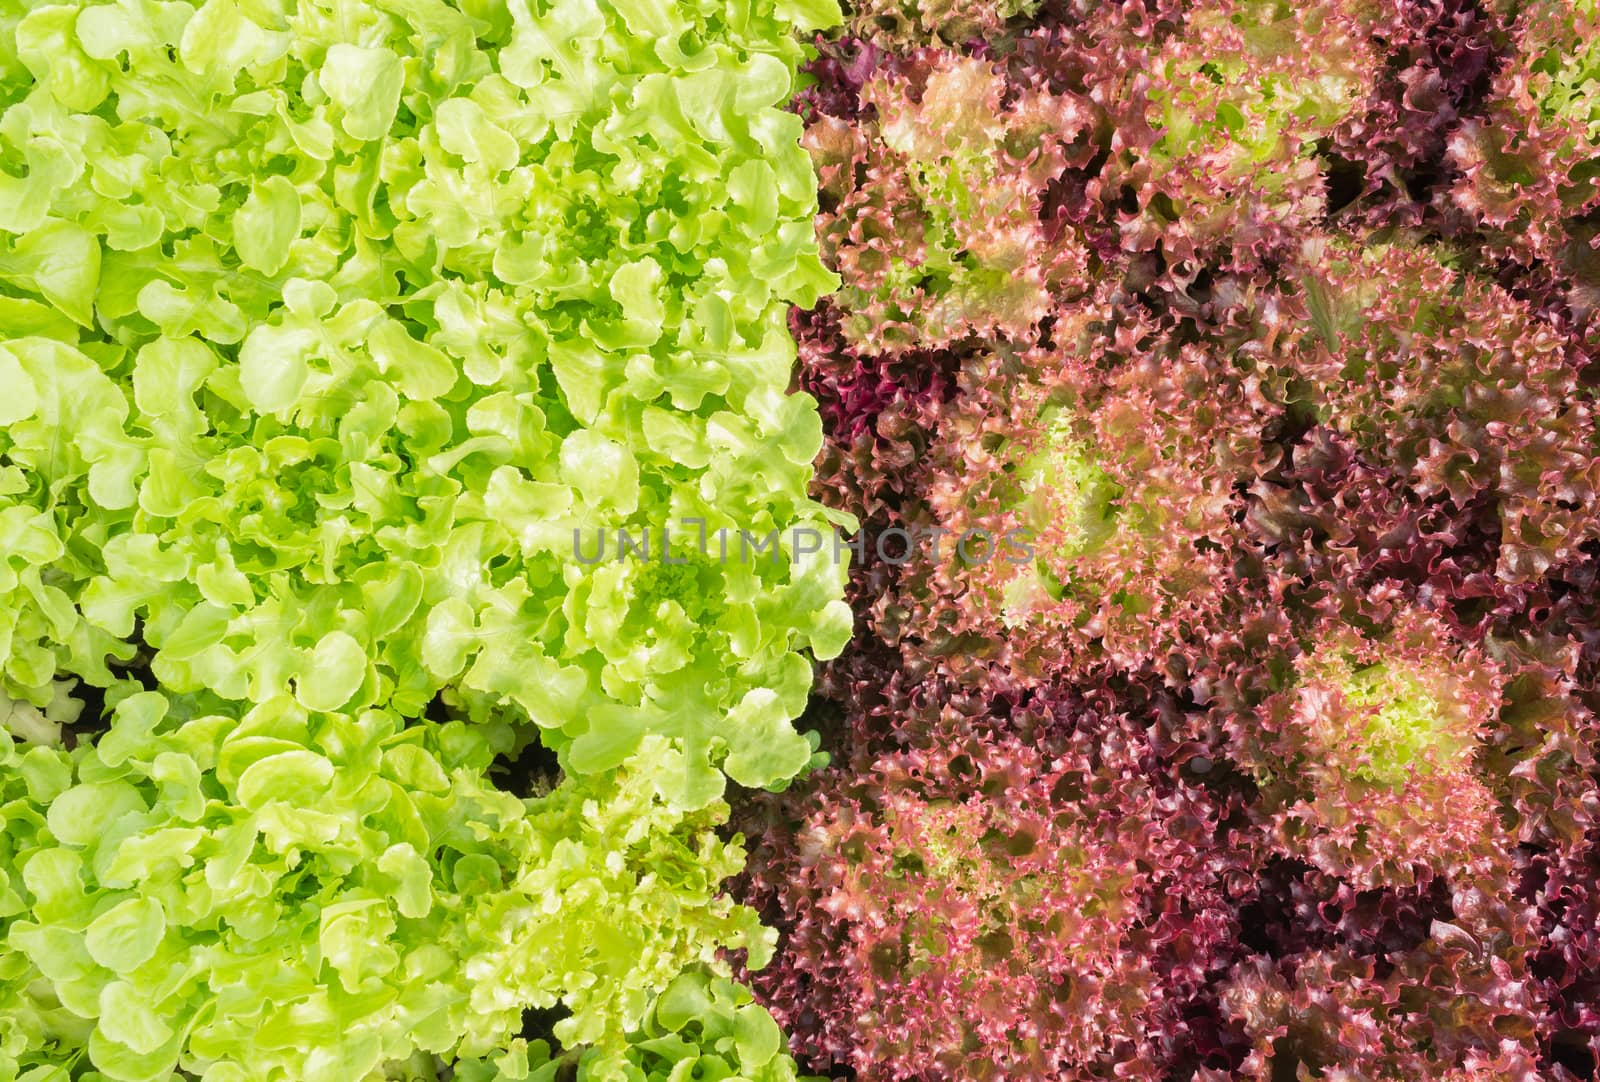 Red leaf lettuce or red coral and green oak lettuce in garden. Red leaf lettuce or red coral and green oak lettuce for vegan or vegetarian food. 
Good for diet and health.